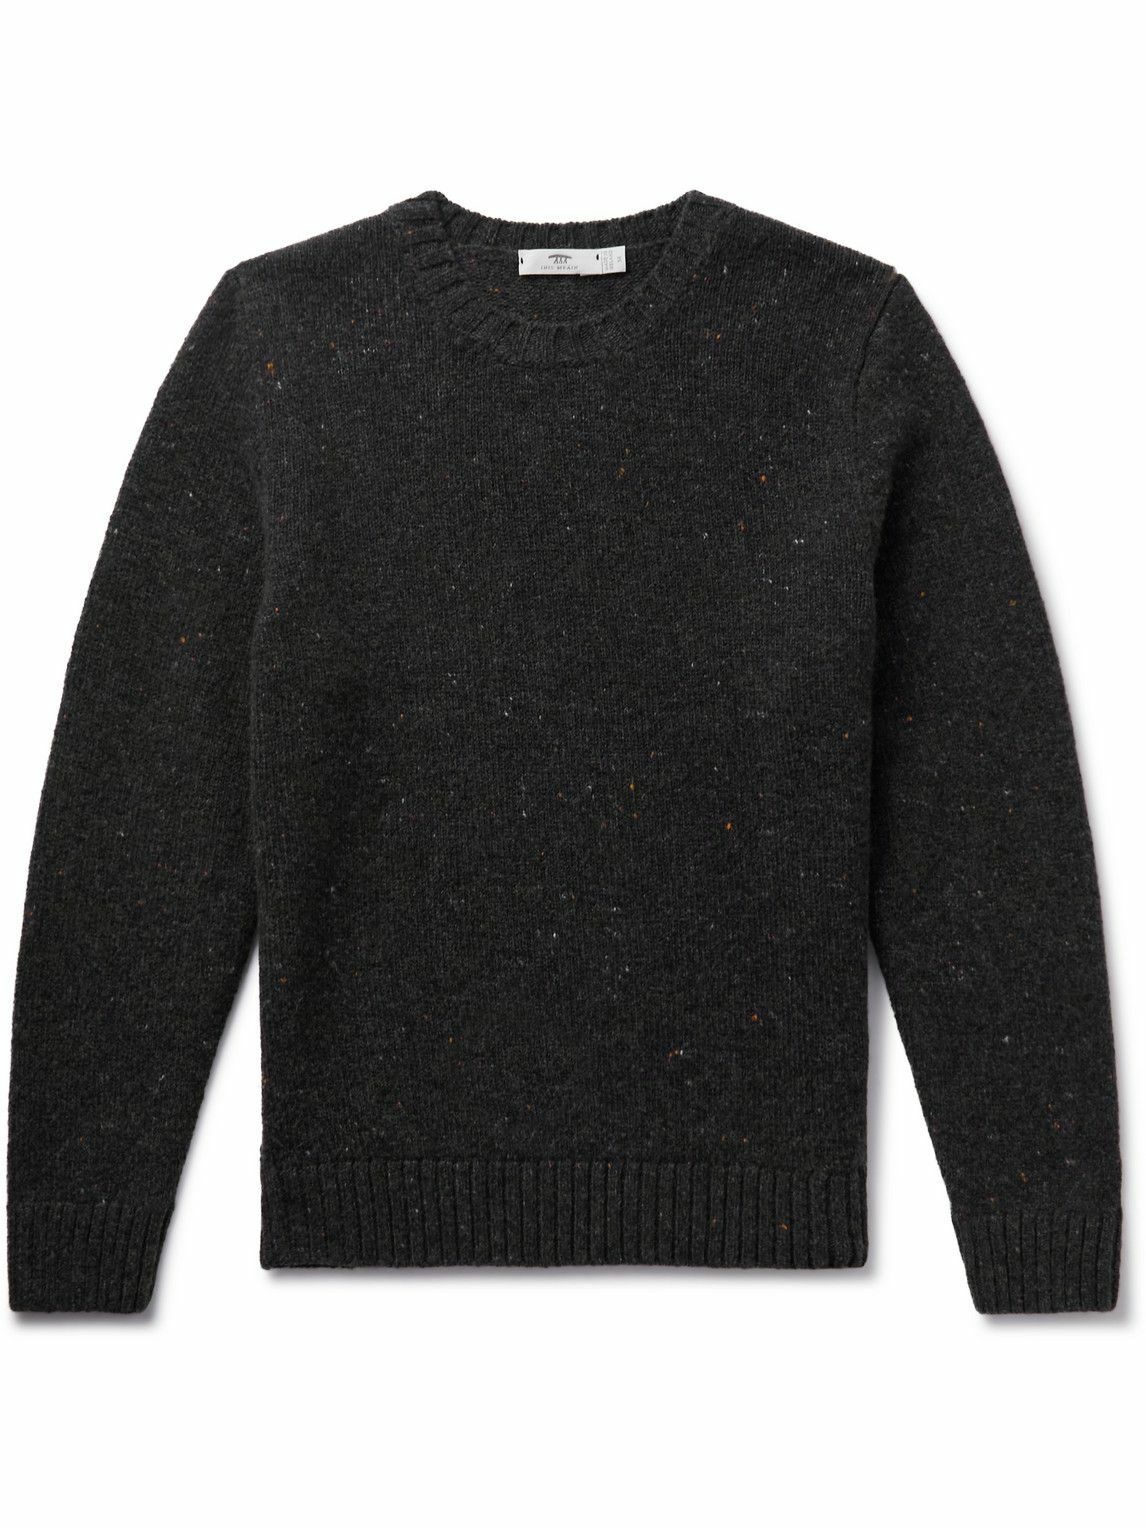 Photo: Inis Meáin - Donegal Merino Wool and Cashmere-Blend Sweater - Gray